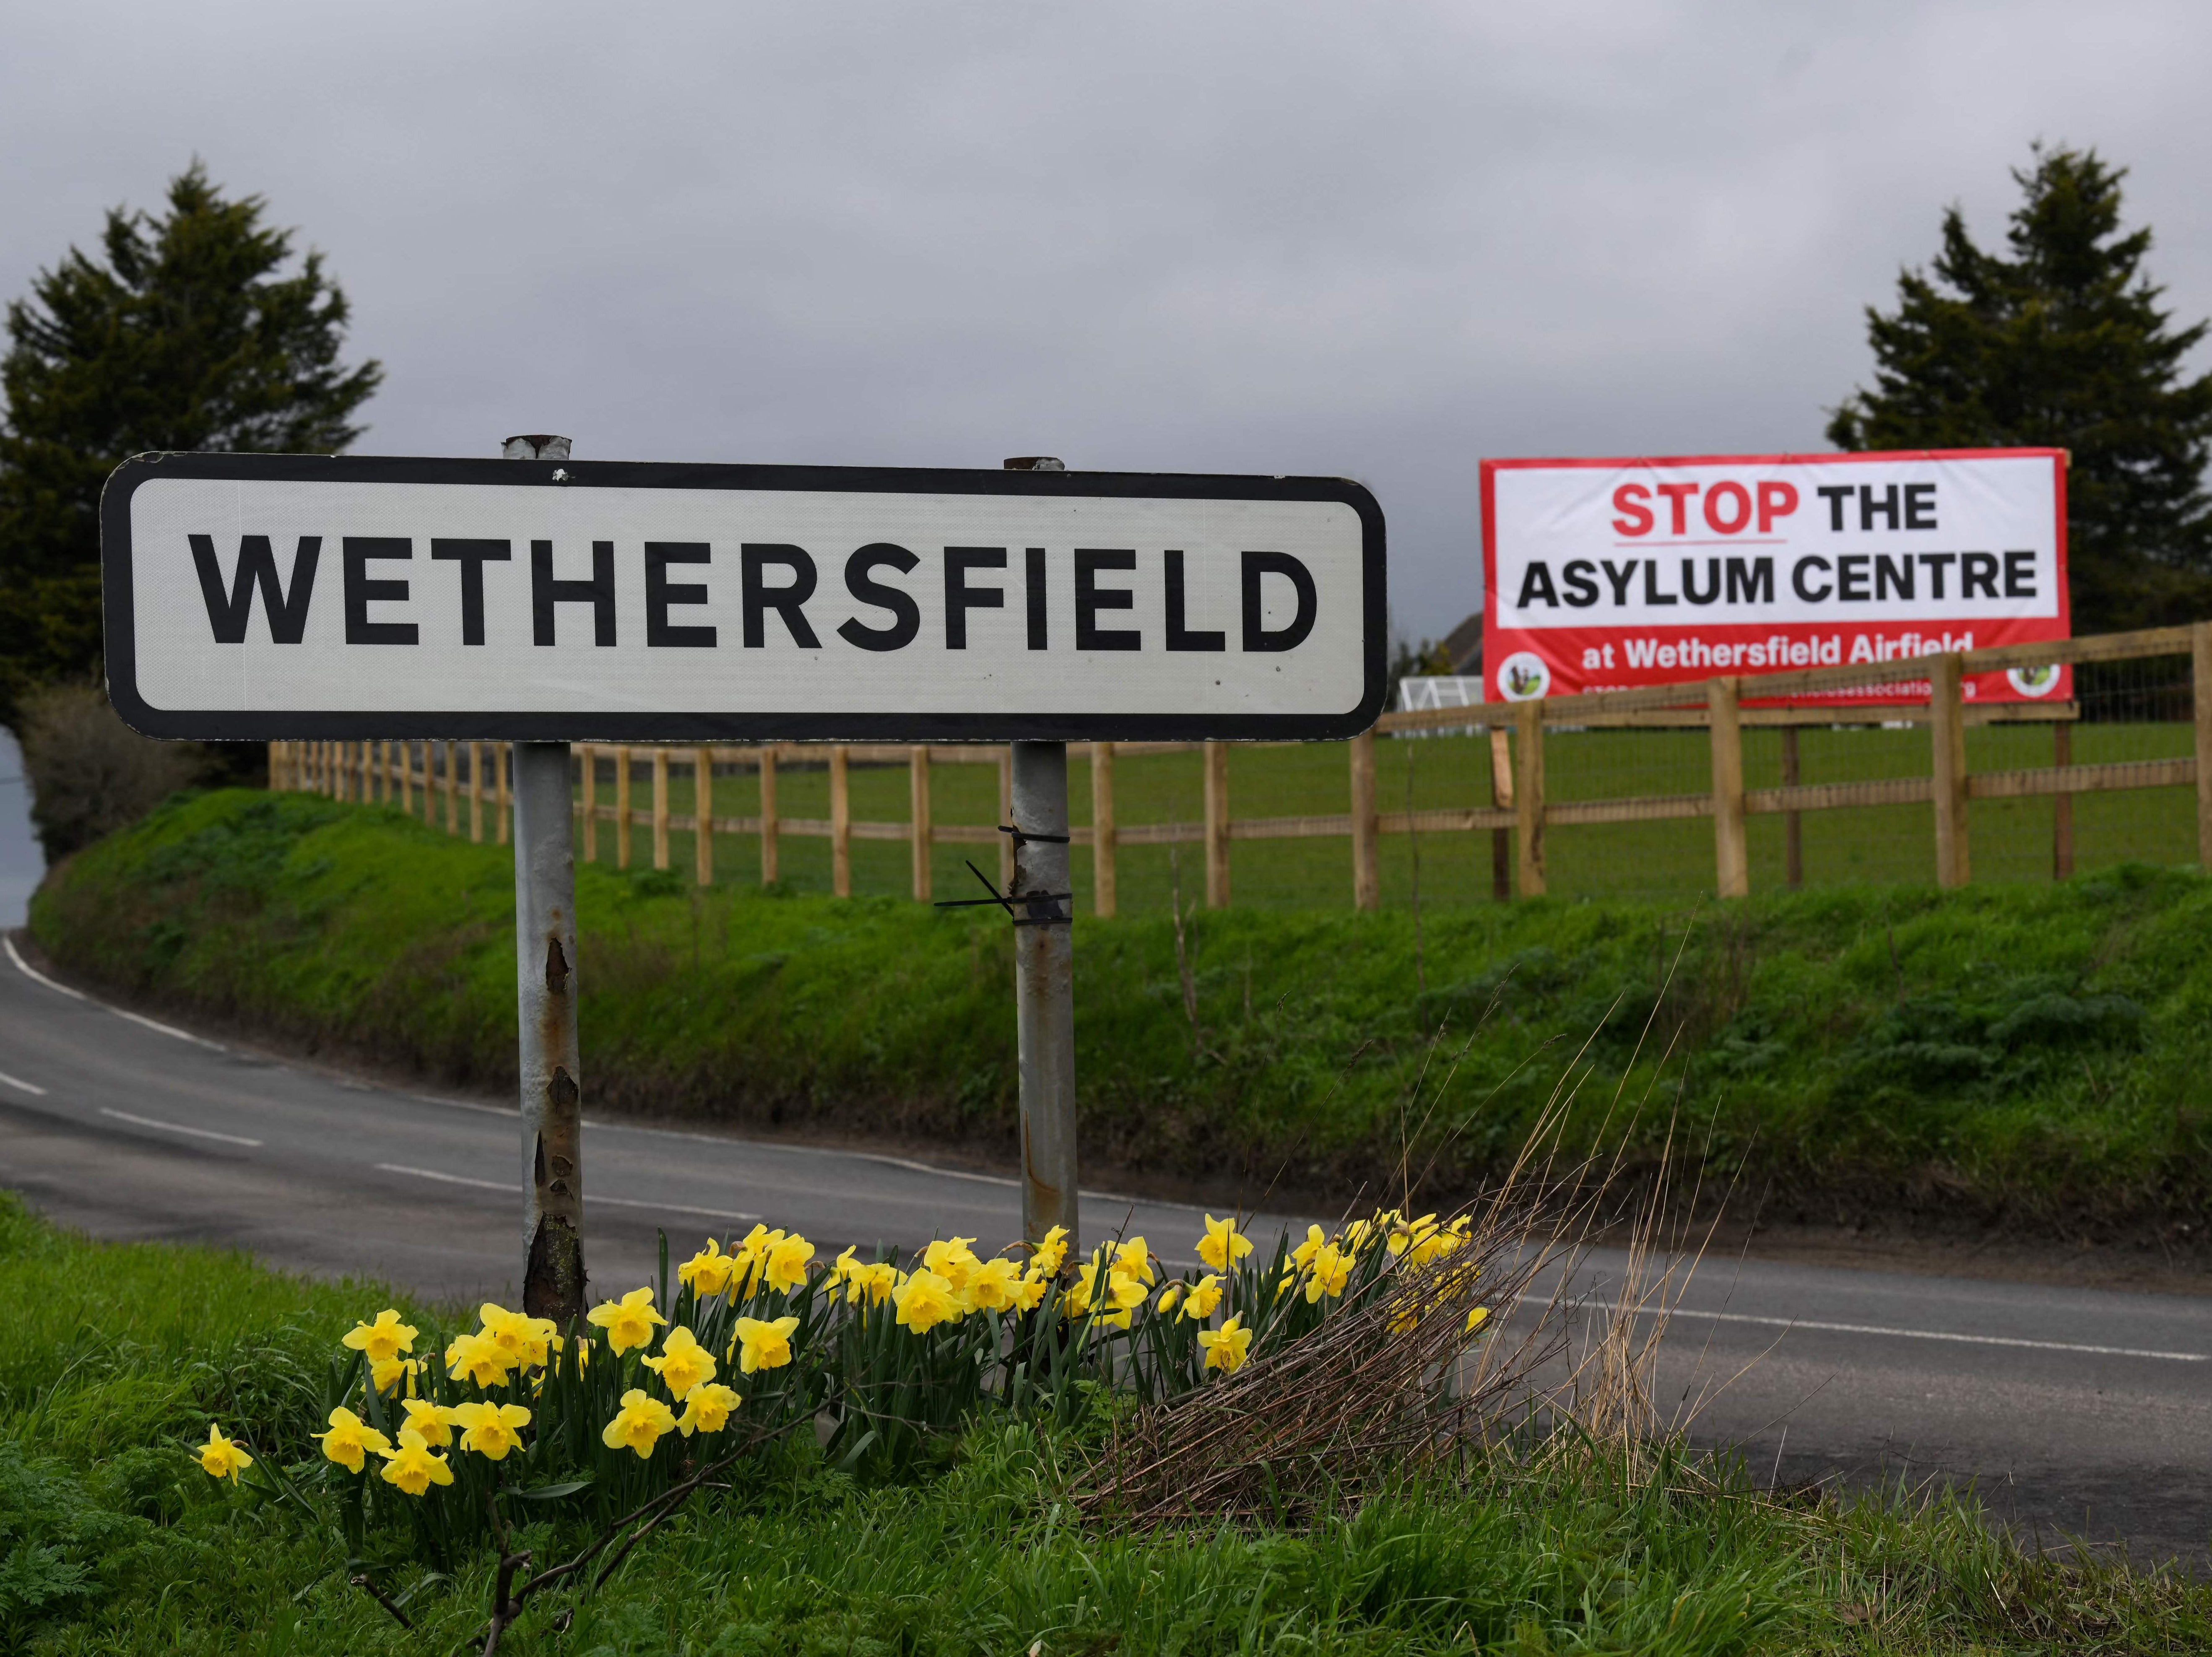 Wethersfield is one of two former military bases set to be used as asylum accommodation